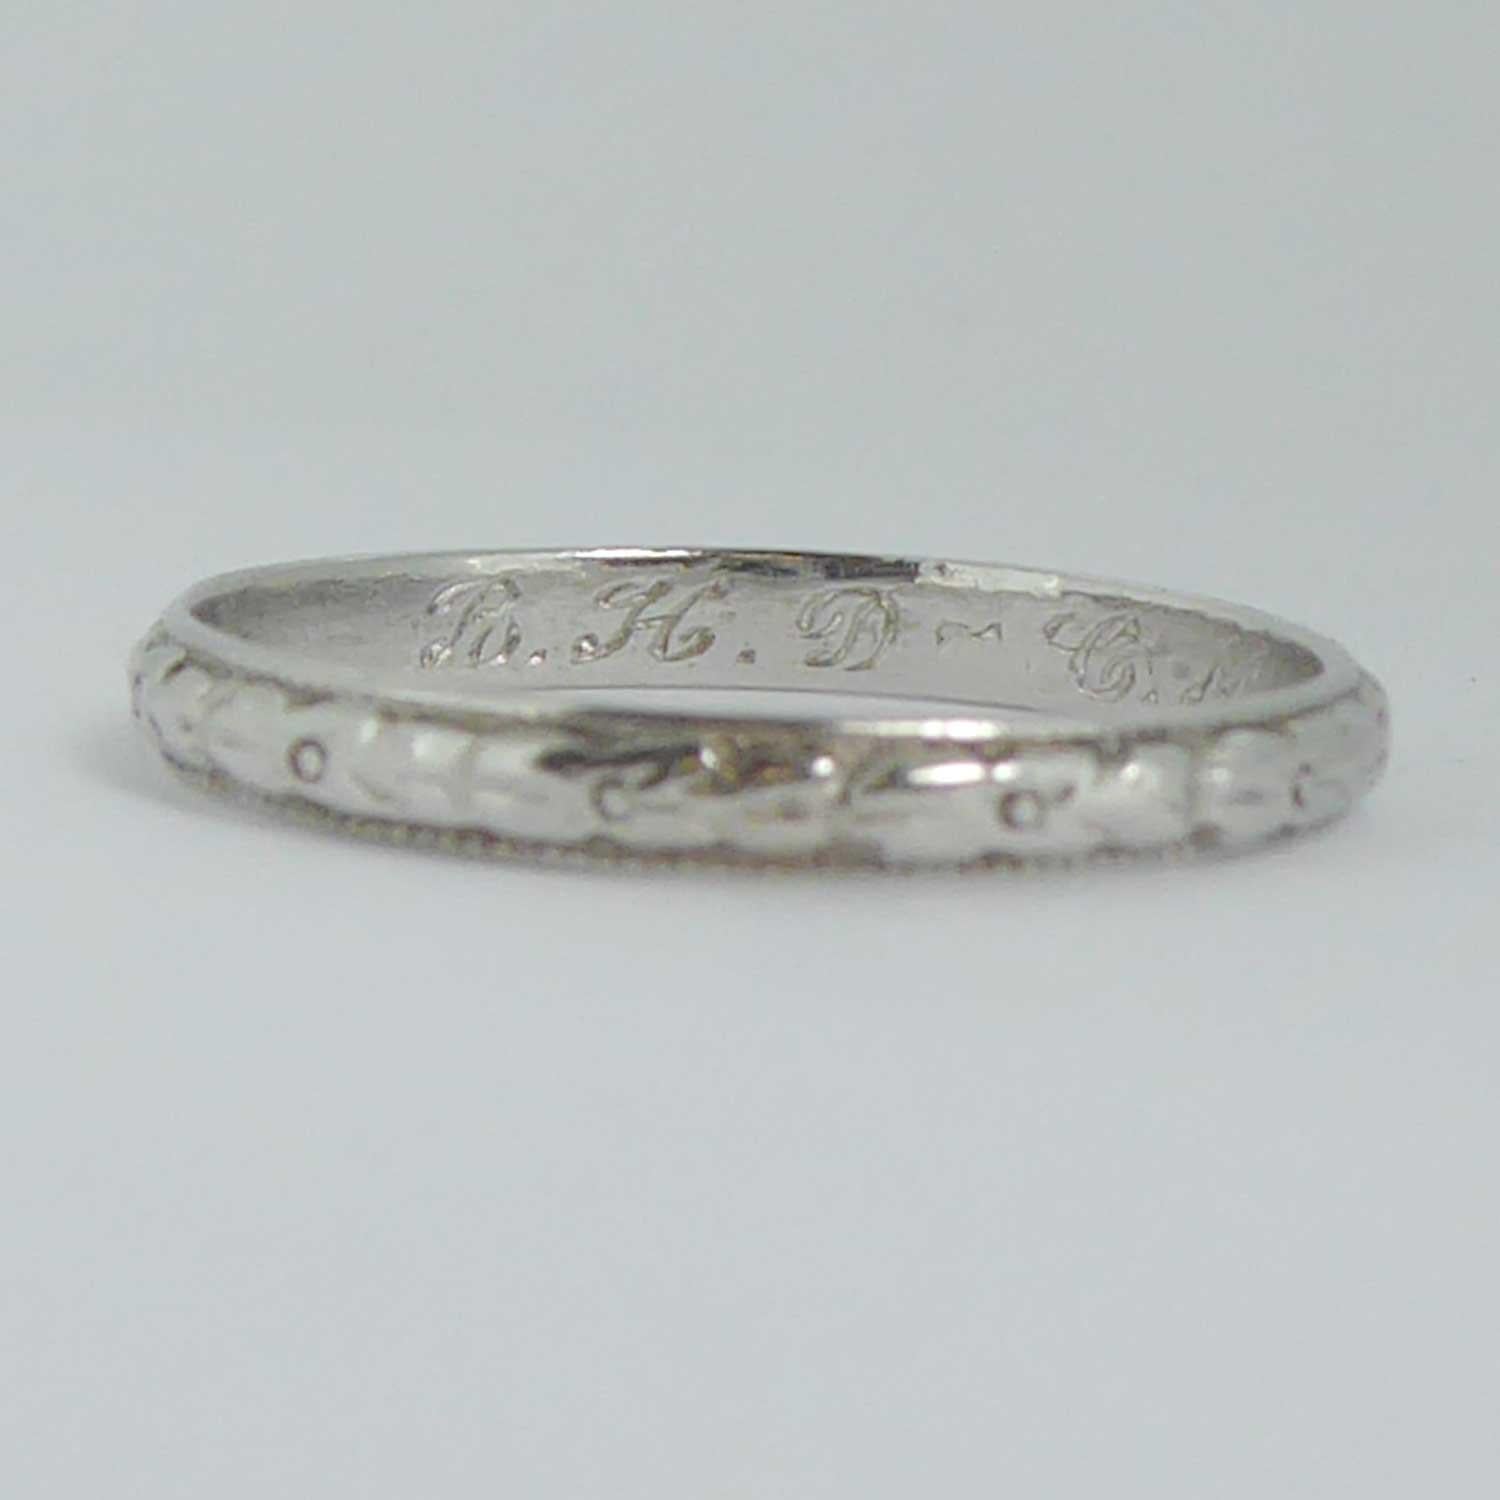 A beautiful vintage wedding ring from the 1940s with floral patterned sections all around the centre of the band and with milled grain edges.  The inside of the band bears the dedication 